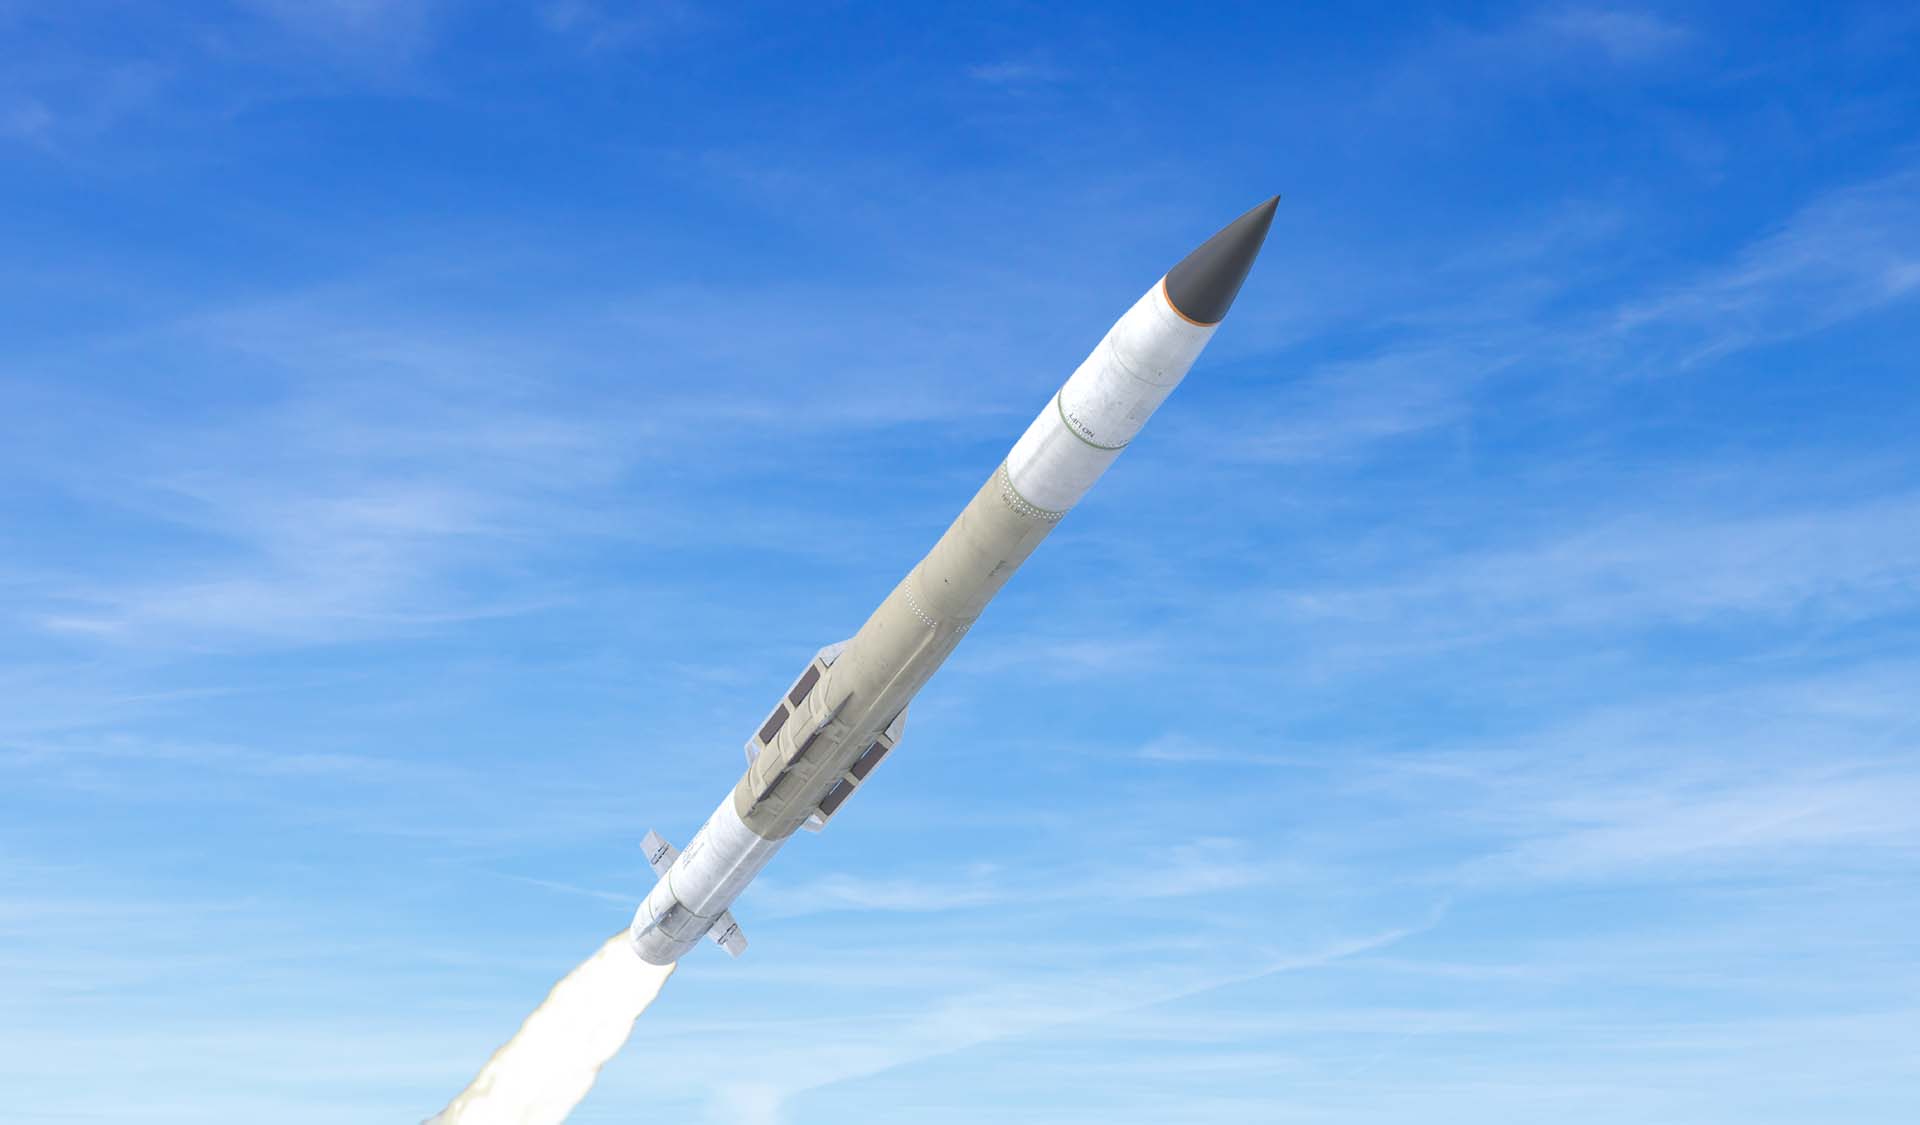 Lockheed Martin’s PAC-3 PAC-3 MSE missile